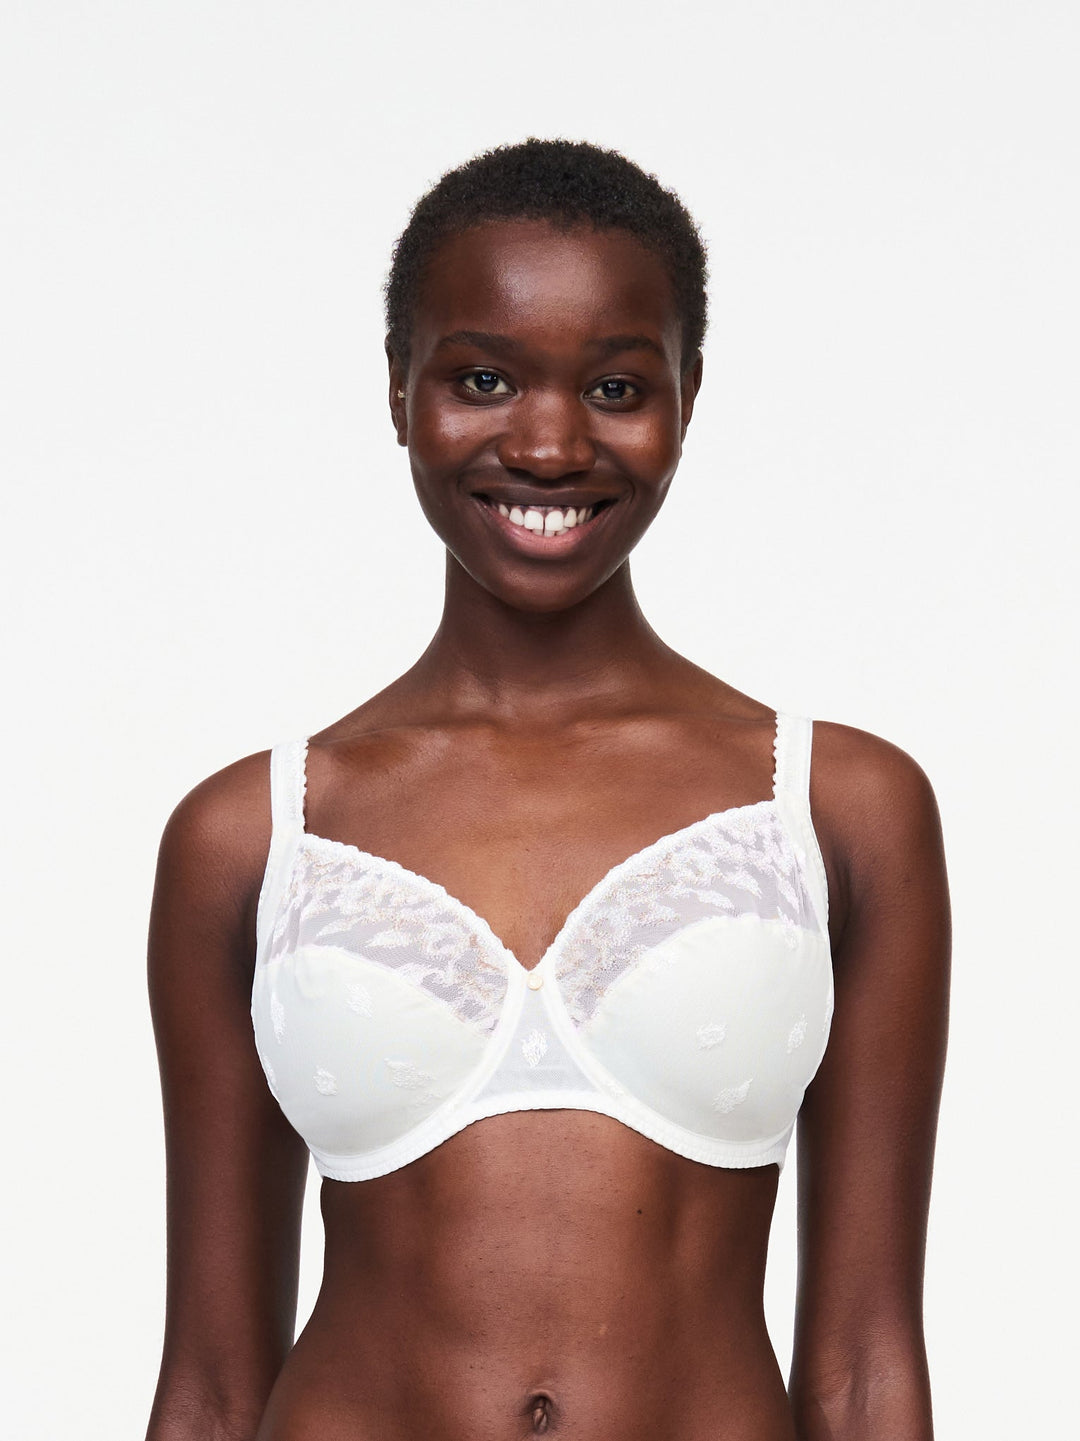 Chantelle Bold Curve Very Covering Underwire Bra - Ivory Multicolor Full Cup Bra Chantelle 